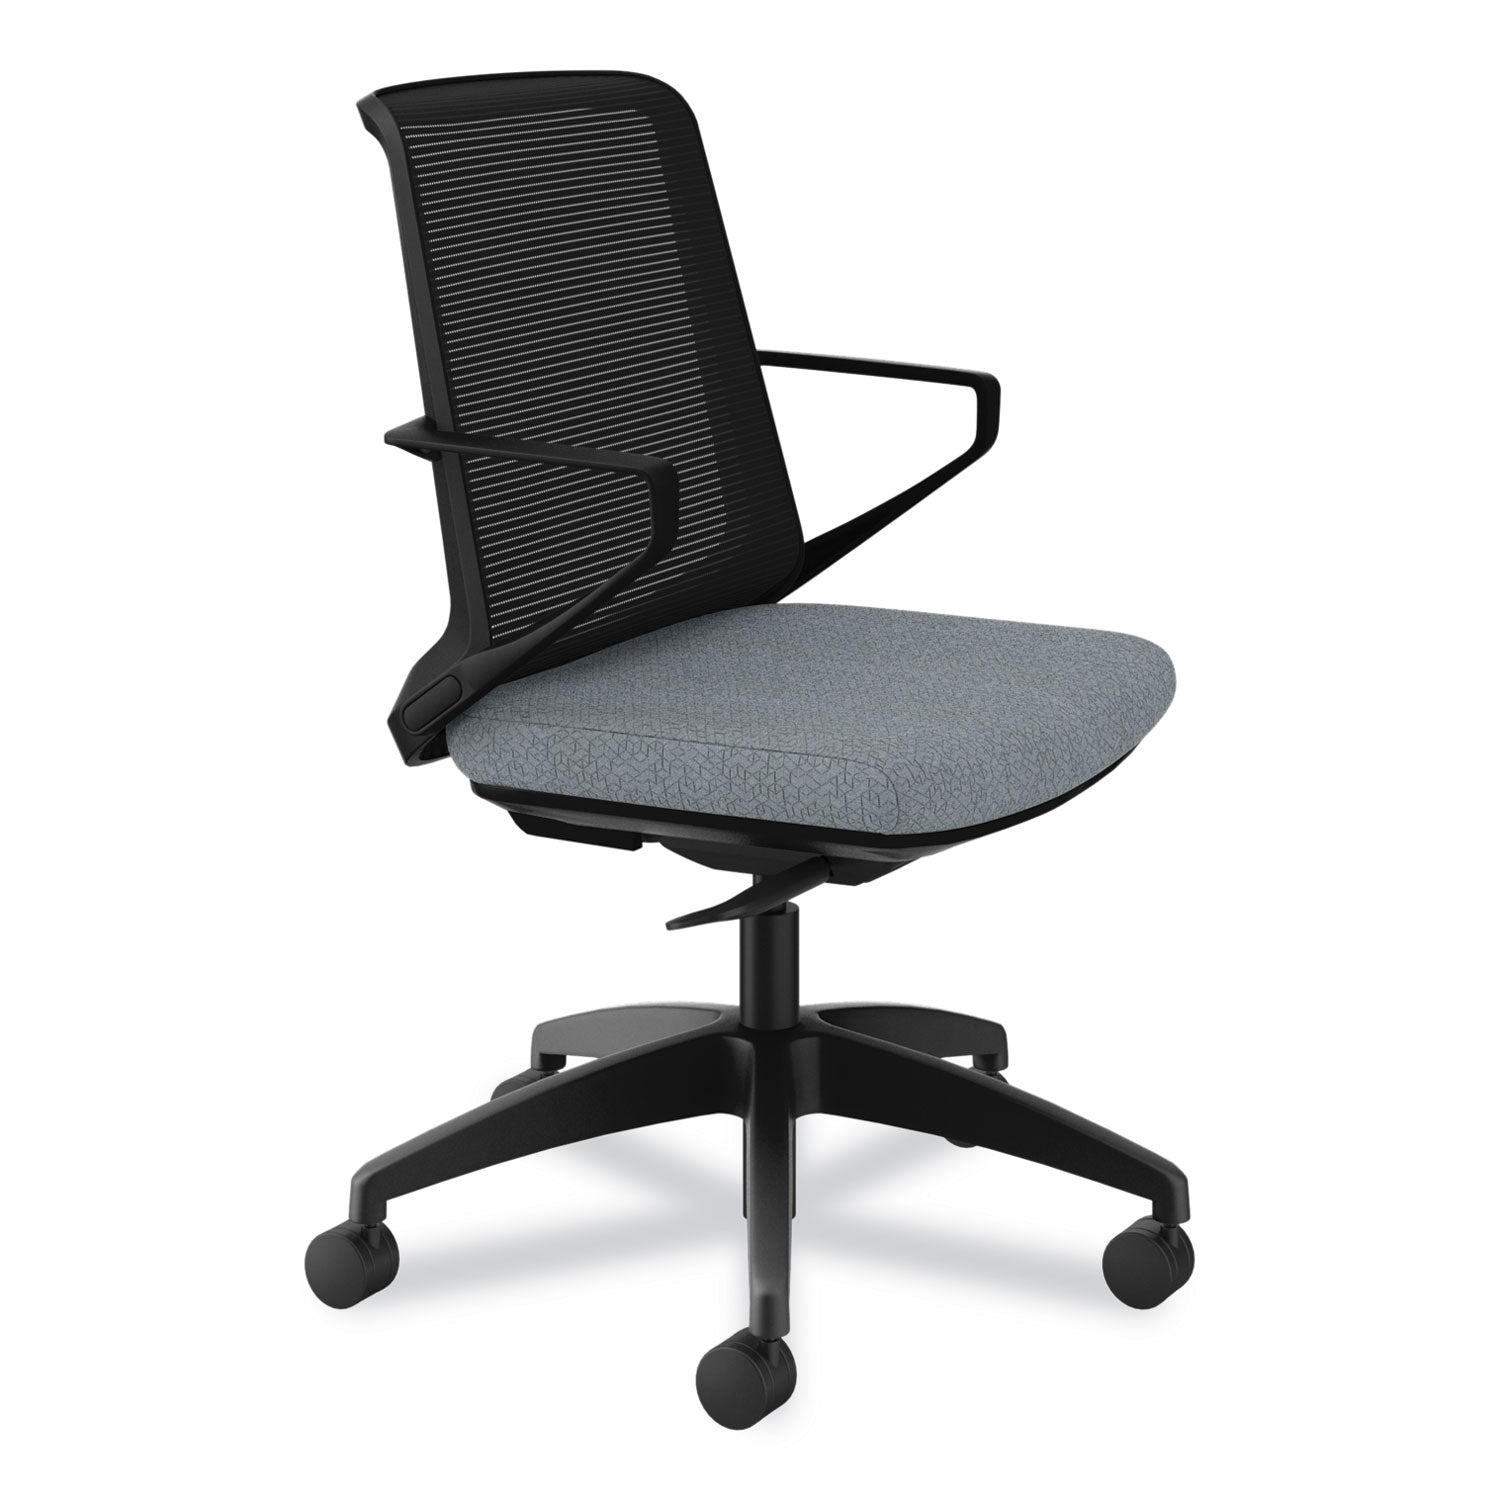 cliq-office-chair-supports-up-to-300-lb-17-to-22-seat-height-basalt-seat-black-back-base-ships-in-7-10-business-days_honclqimapx25t - 5